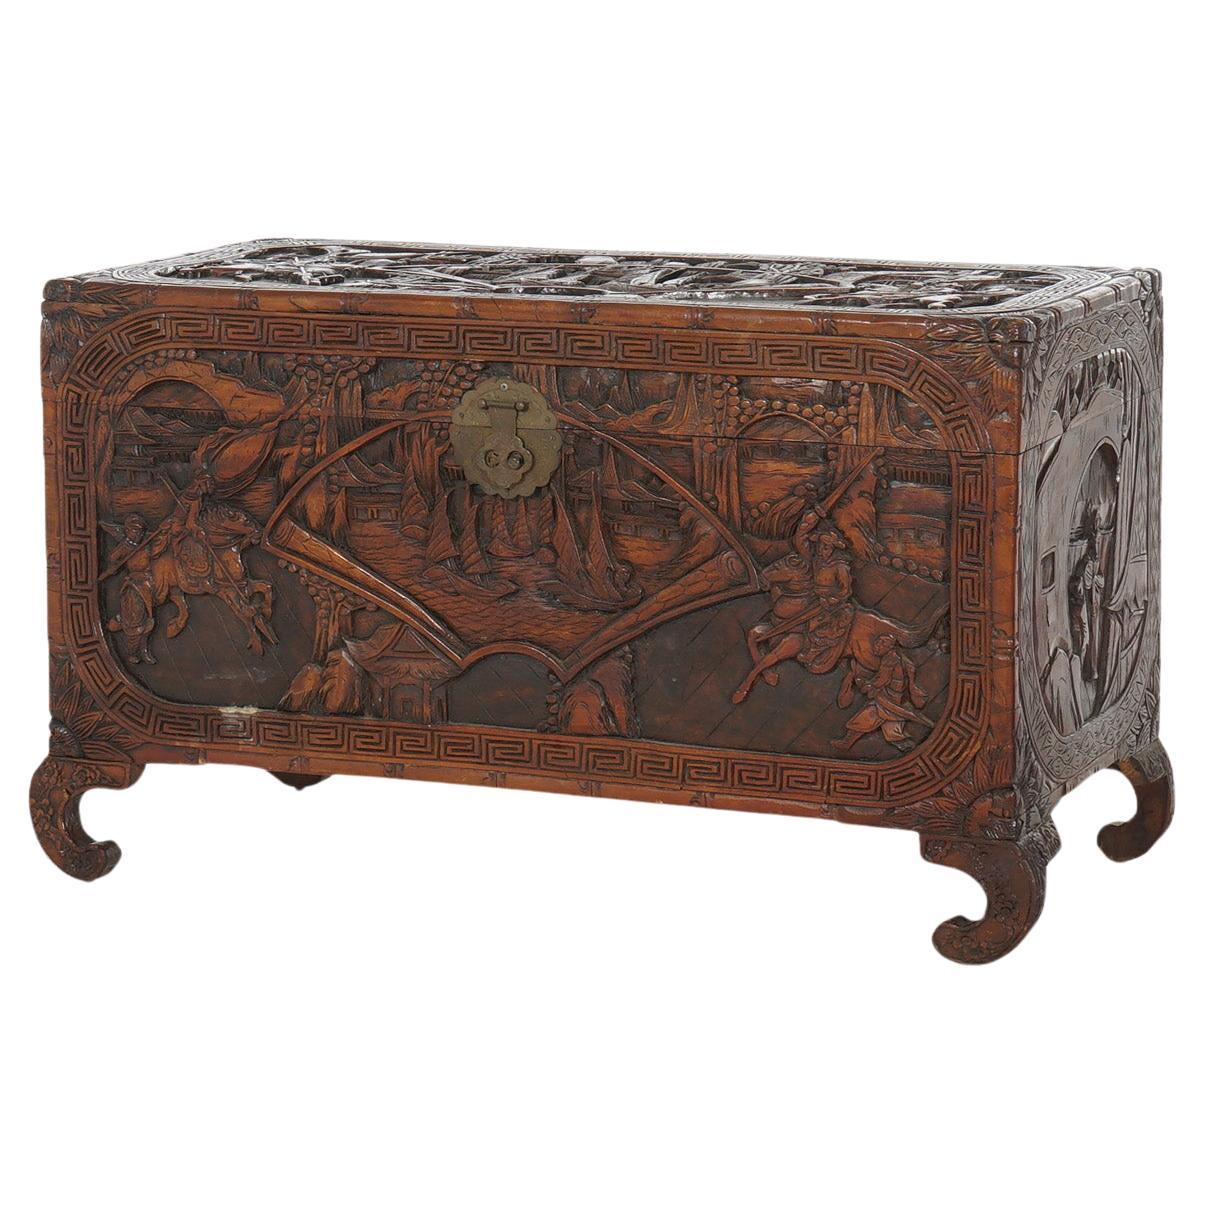 Antique Chinese Carved Hardwood Chest with Figures & Scenes in Relief C1920